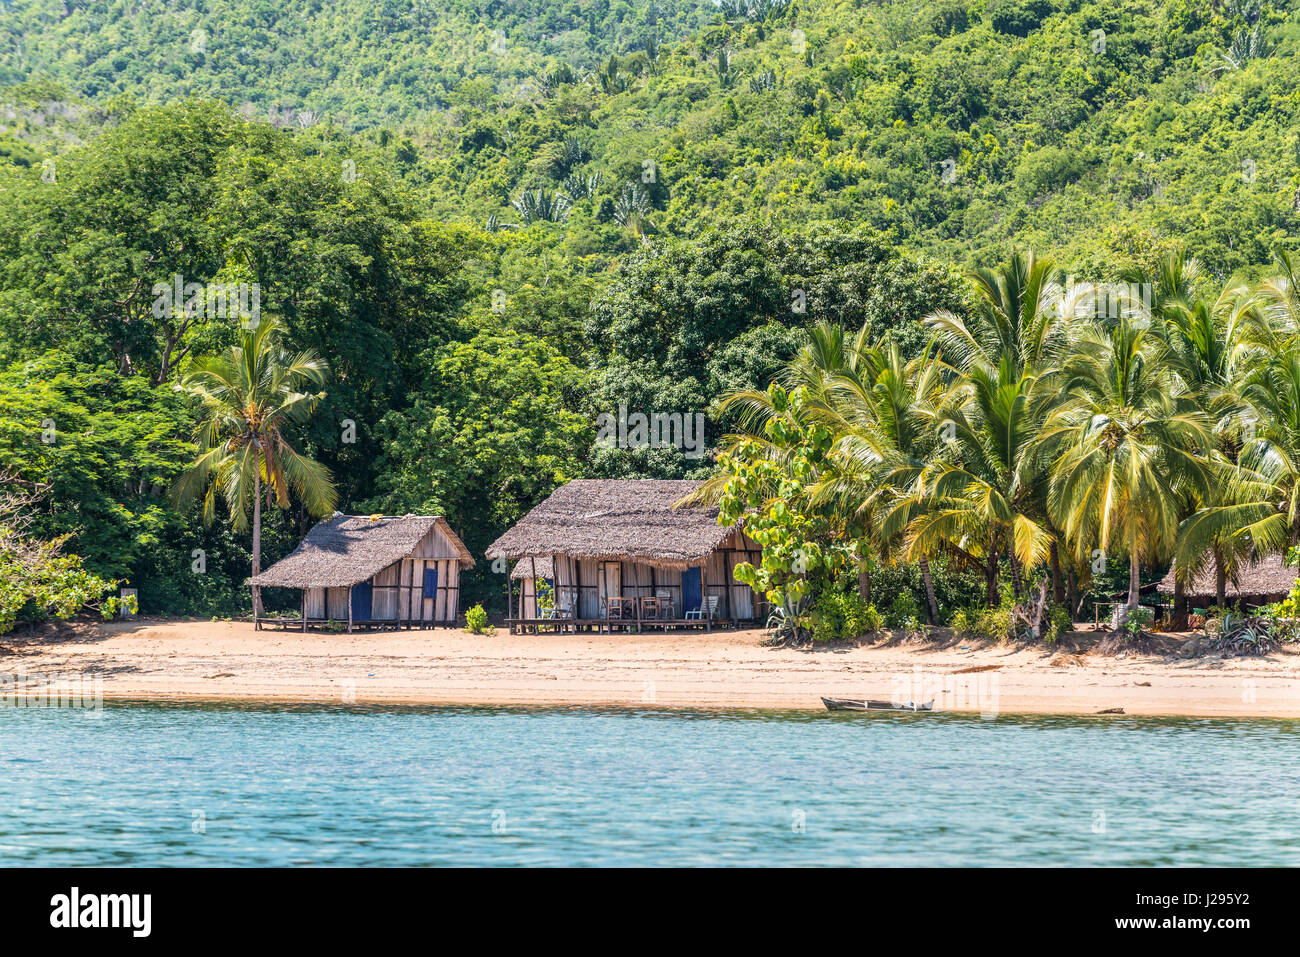 Nosy Be, Madagascar - December 19, 2015: Lokobe Strict Reserve beach view in Nosy Be, Madagascar. It is known for its black lemurs and the beautiful N Stock Photo